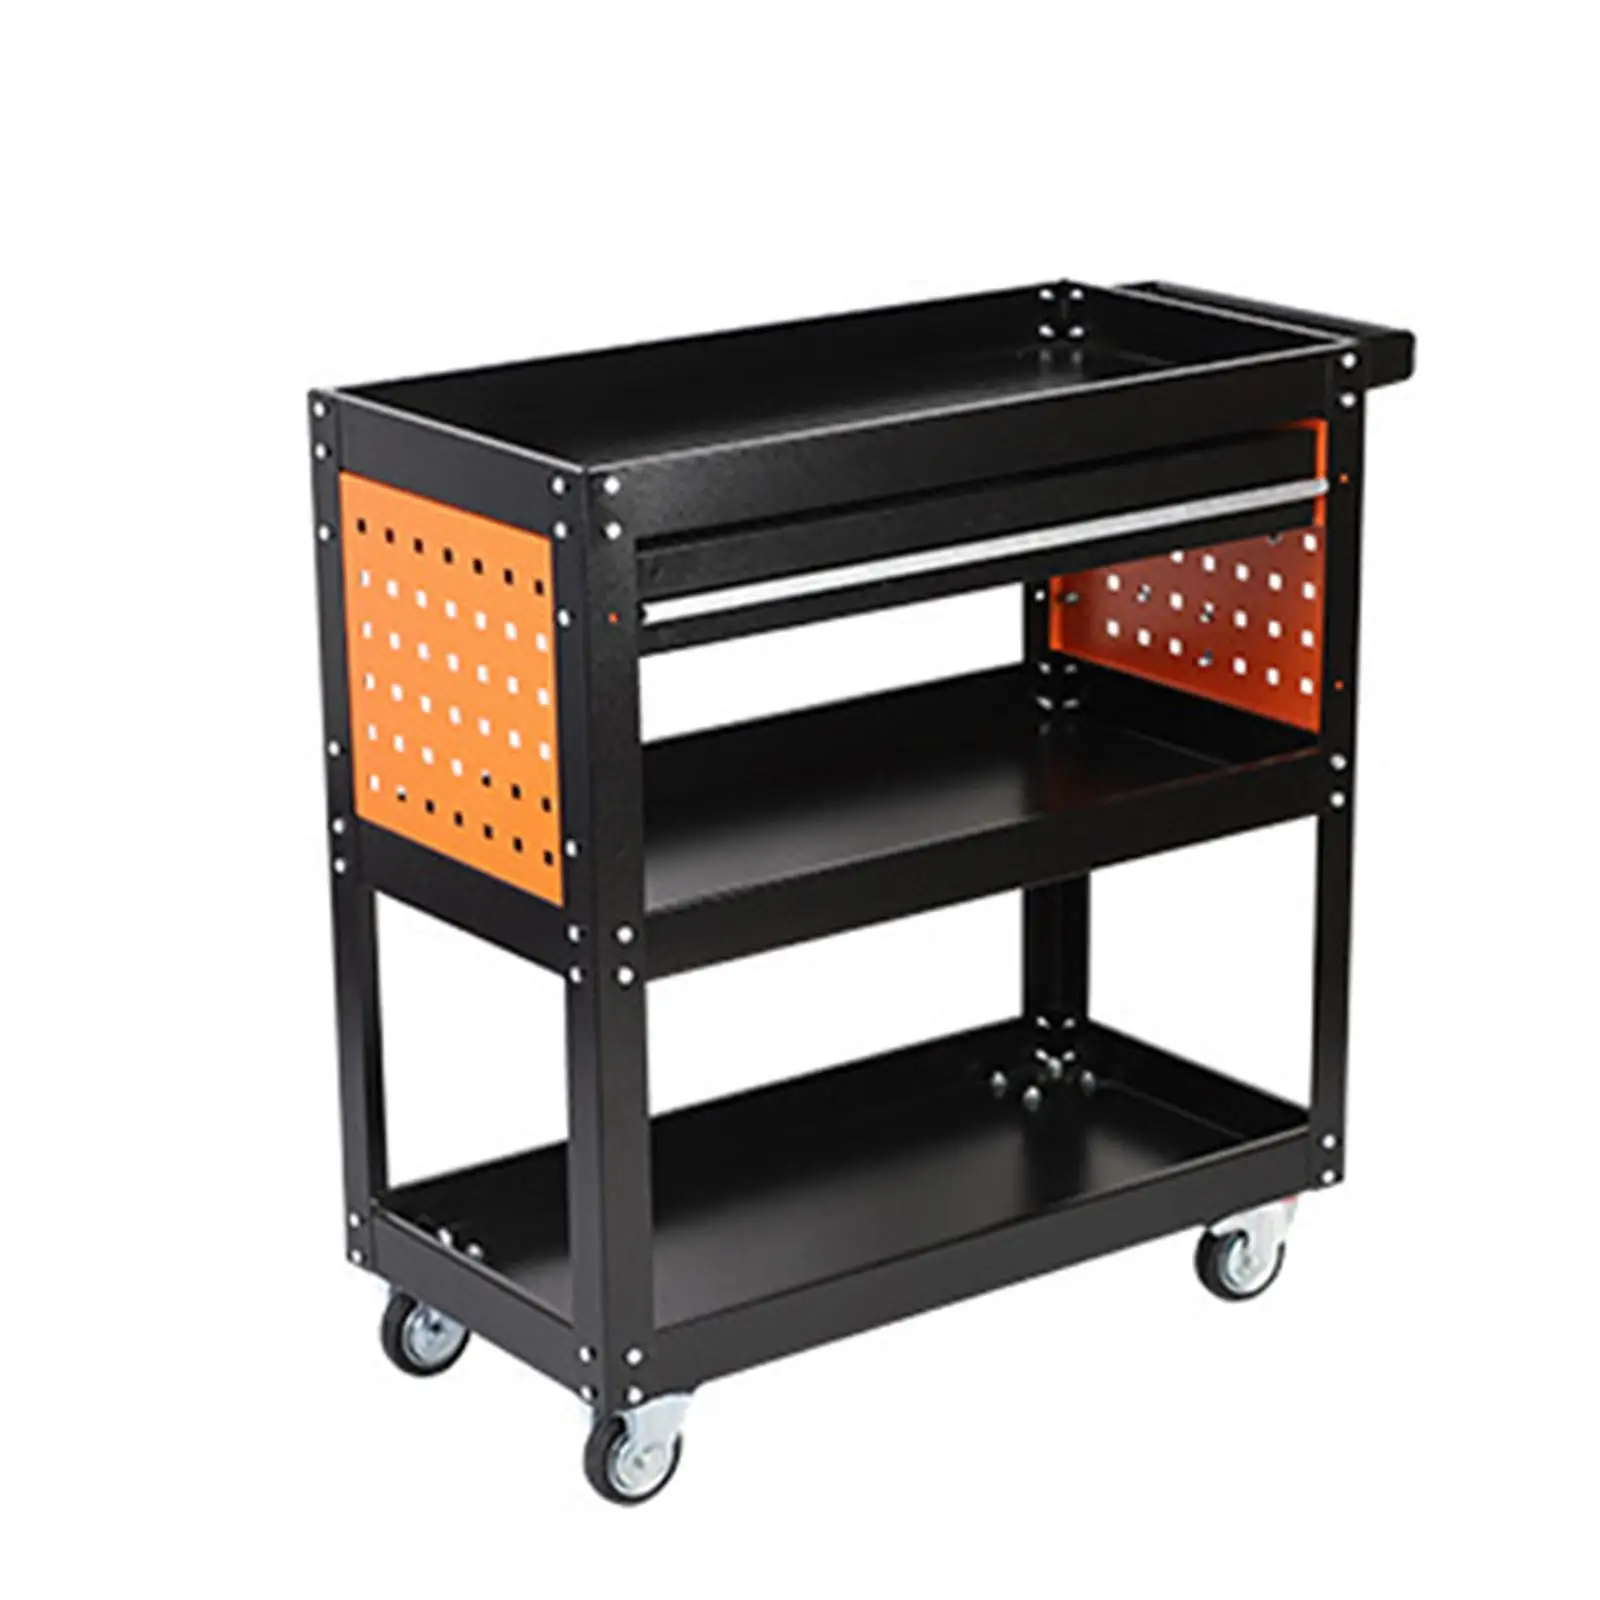 Rolling Trolley Tool Cart Organizer with Wheels Utility Movable Storage Stand Heavy Duty Service Cart Storage Cabinet for Garage